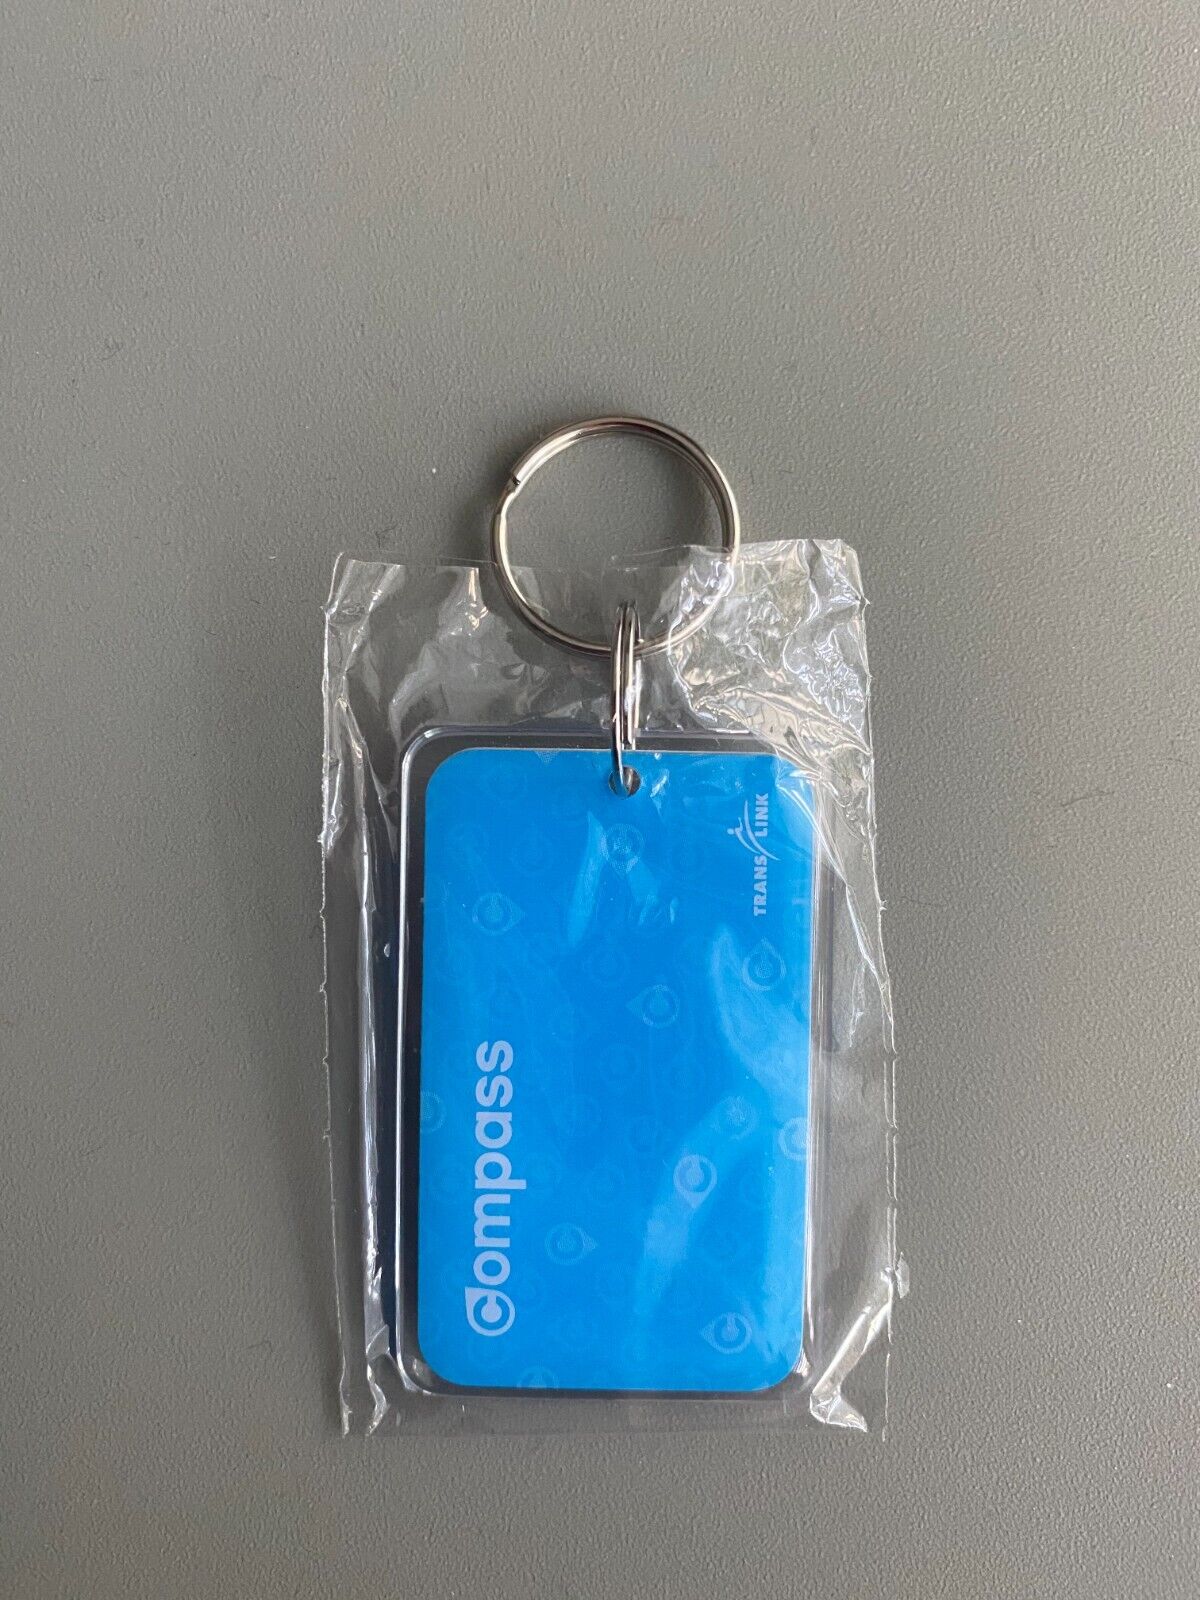 Canada Vancouver TransLink Compass Card Mini Keychain for Adult